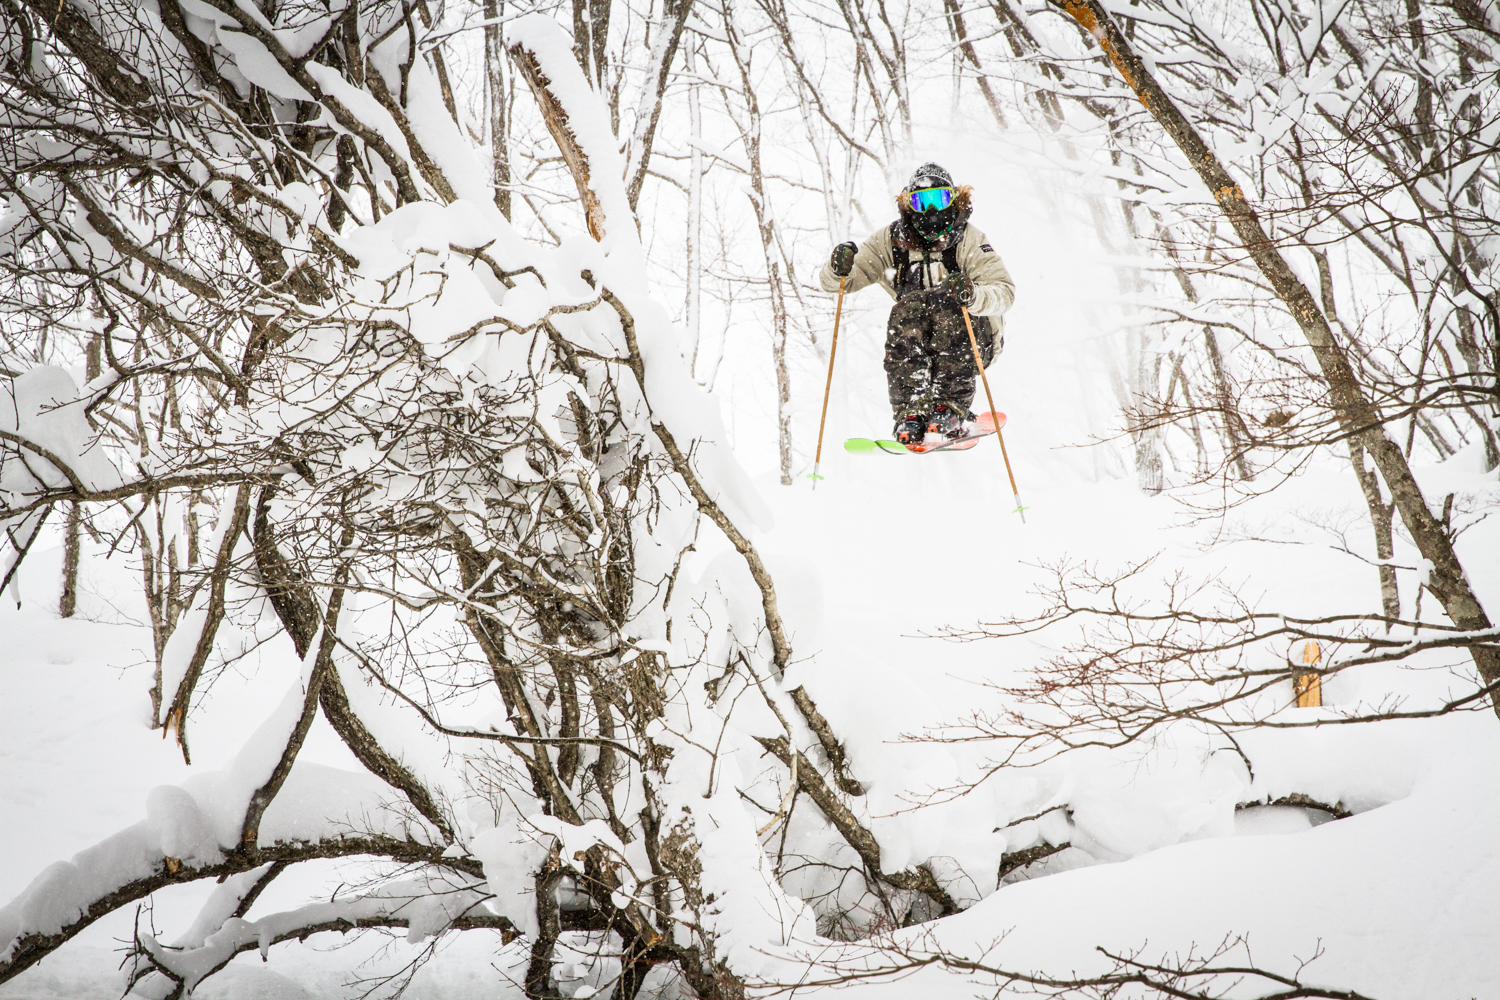 Karl Fostvedt jumps through the trees in Hakuba, Japan while filming for the Tamashii Project.